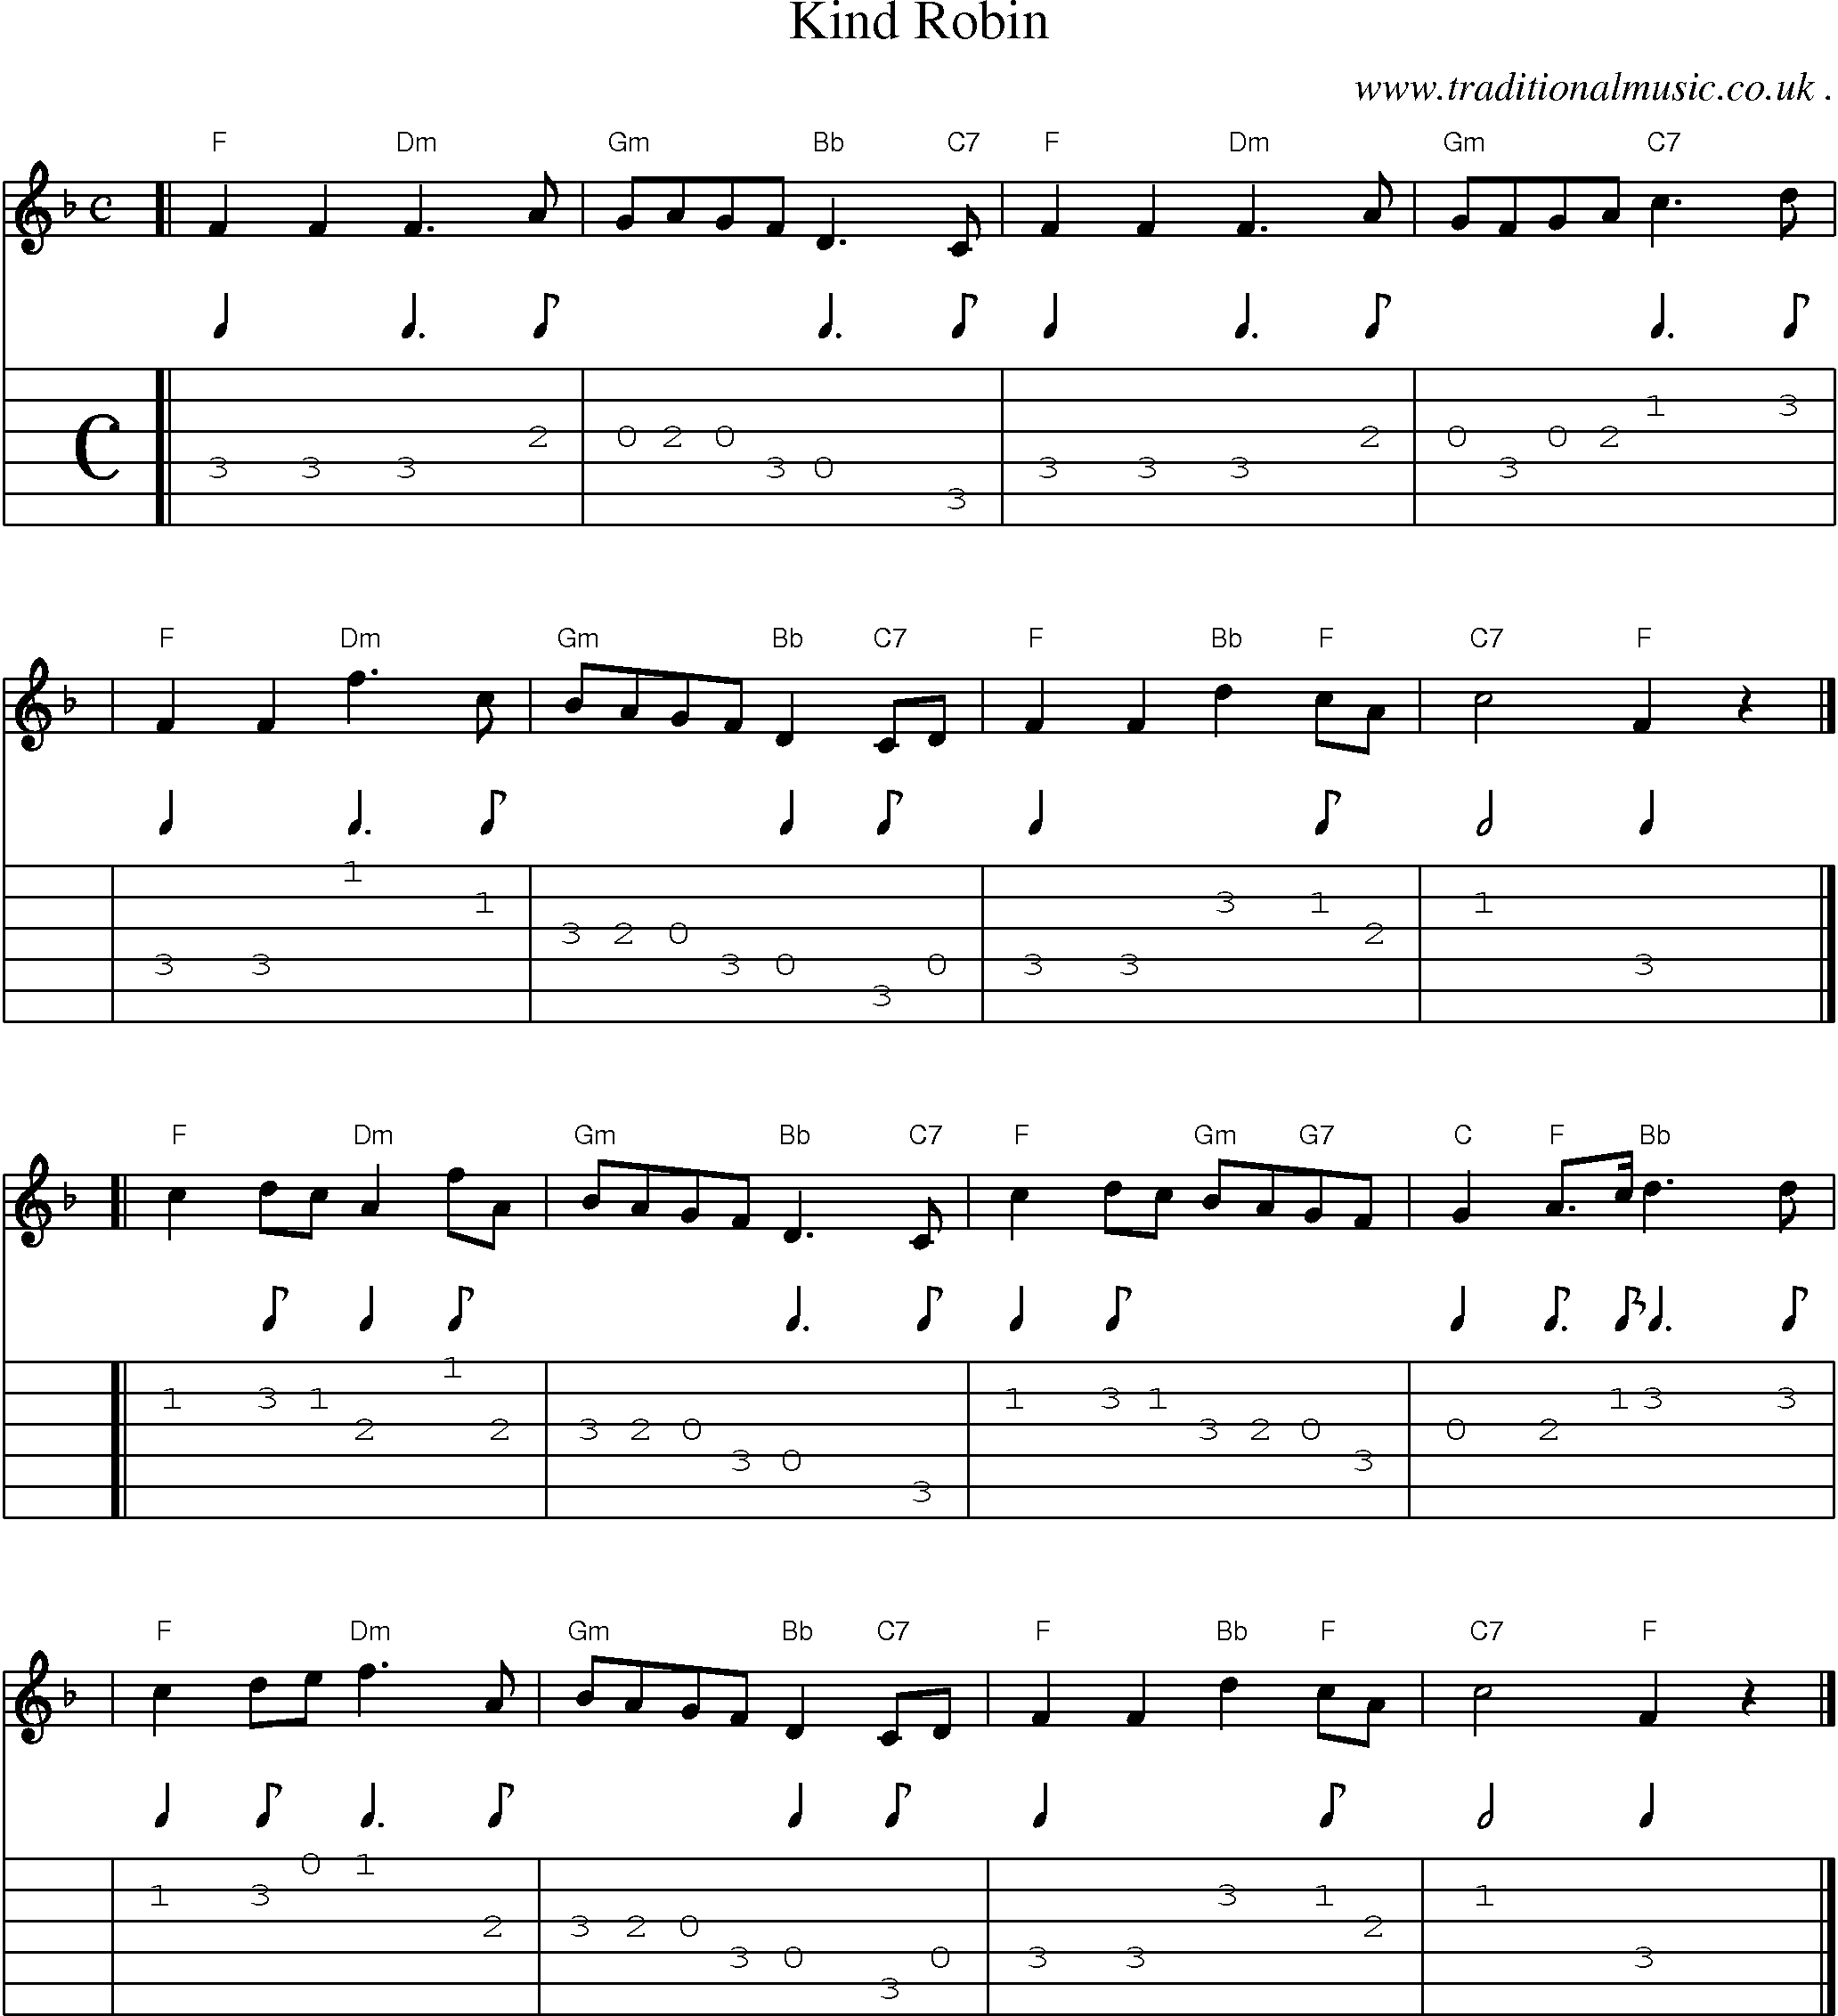 Sheet-music  score, Chords and Guitar Tabs for Kind Robin